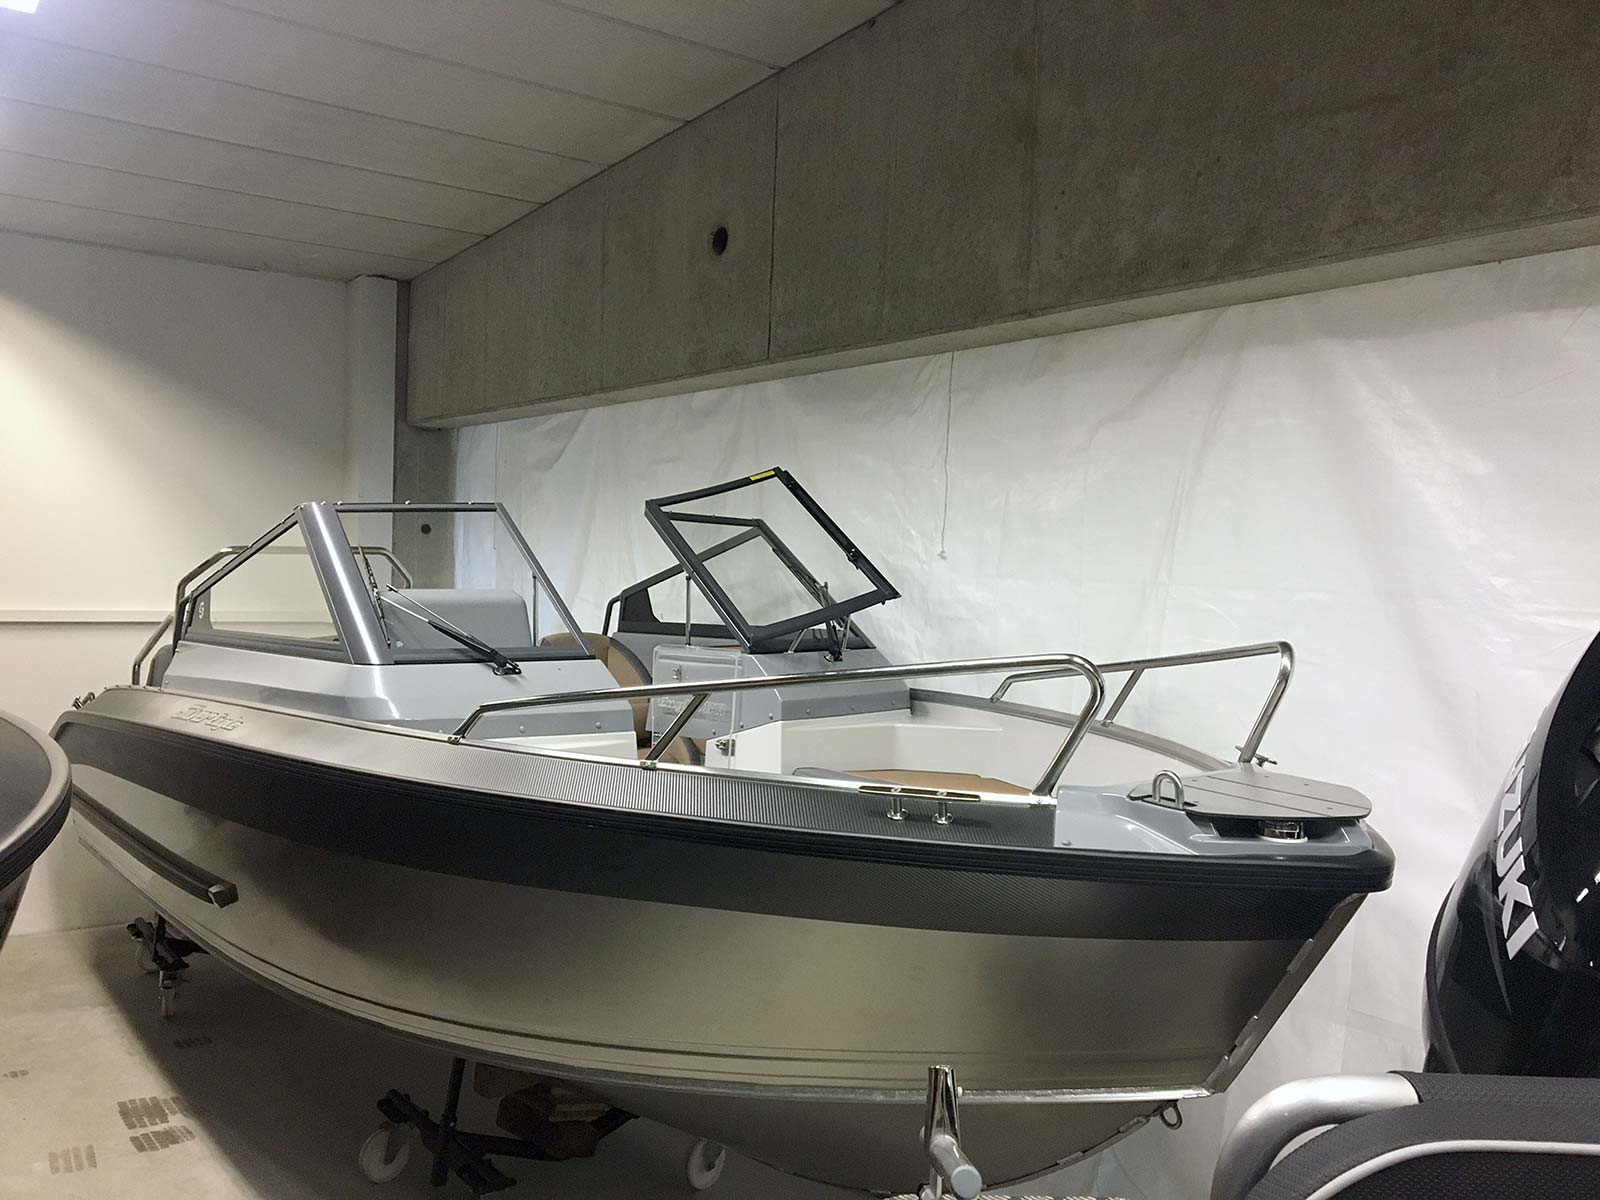 SALE: Silver Eagle BR 640 | Boat Solutions, Utting am Ammersee